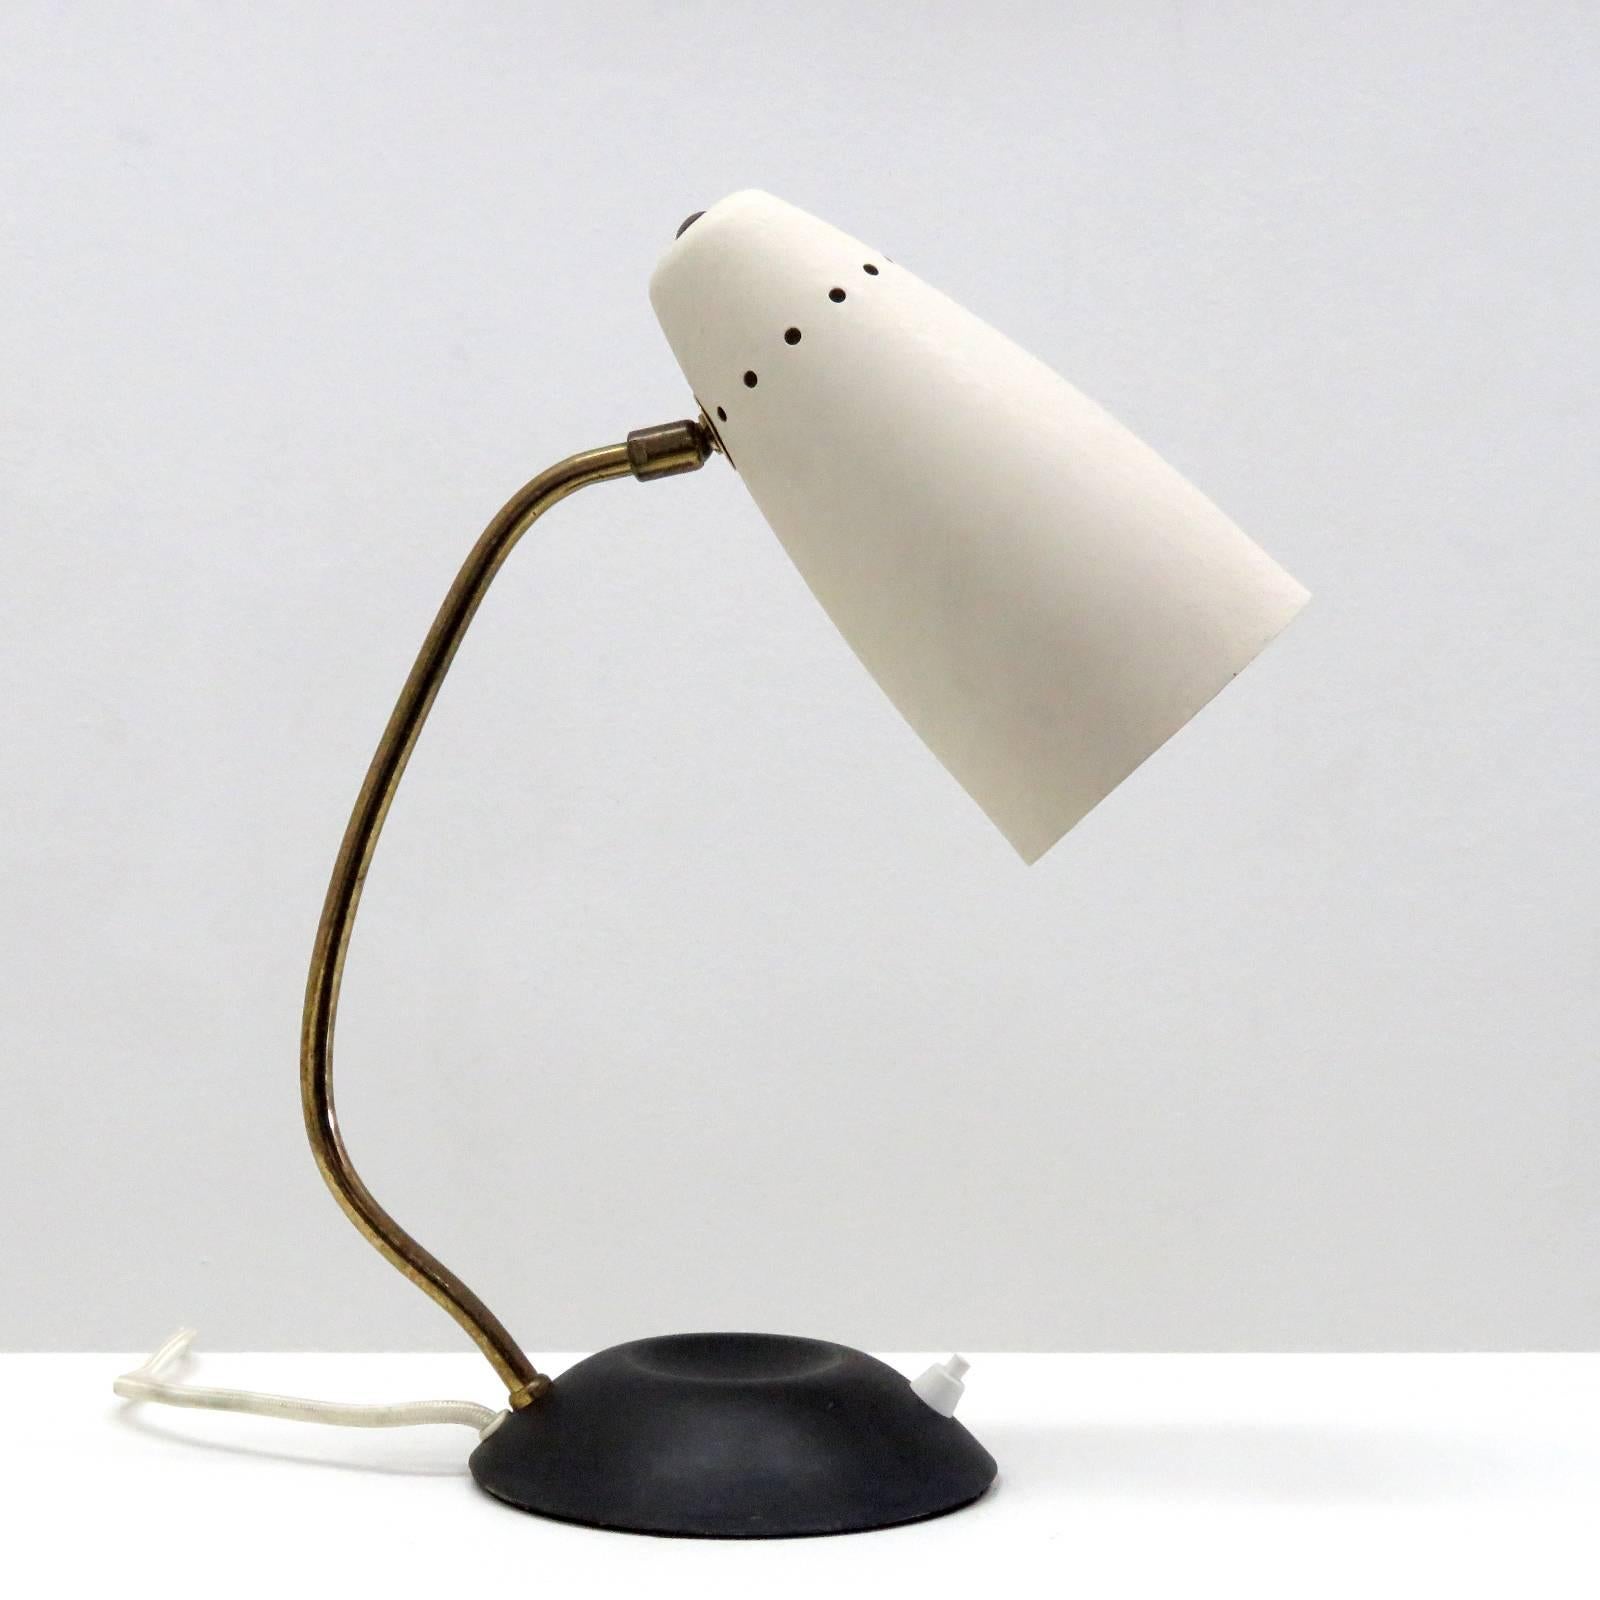 Elegant articulate table lamp, with matte black metal base, curved brass arm, orientable aluminium shade in textured ivory, on/off switch on the base.